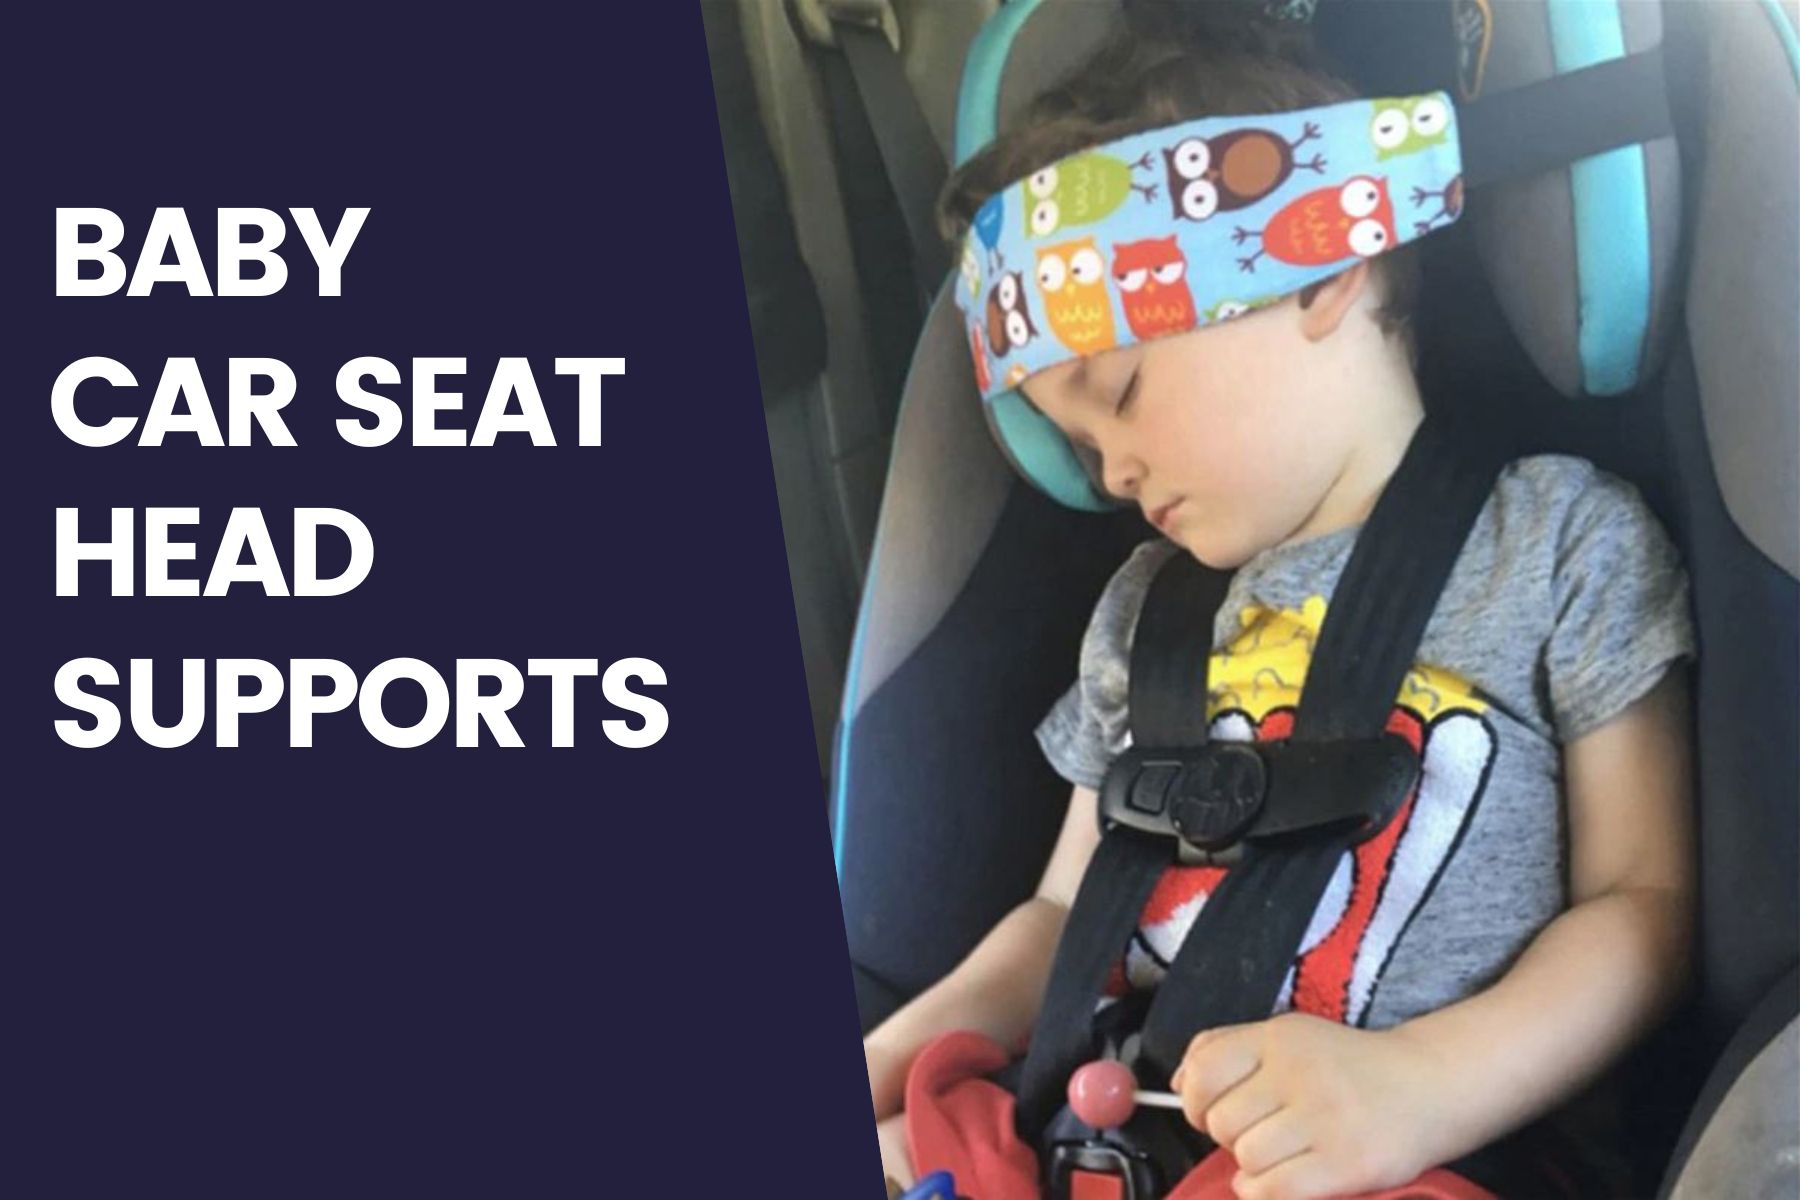 National Retail Association calls for a ban on car seat head